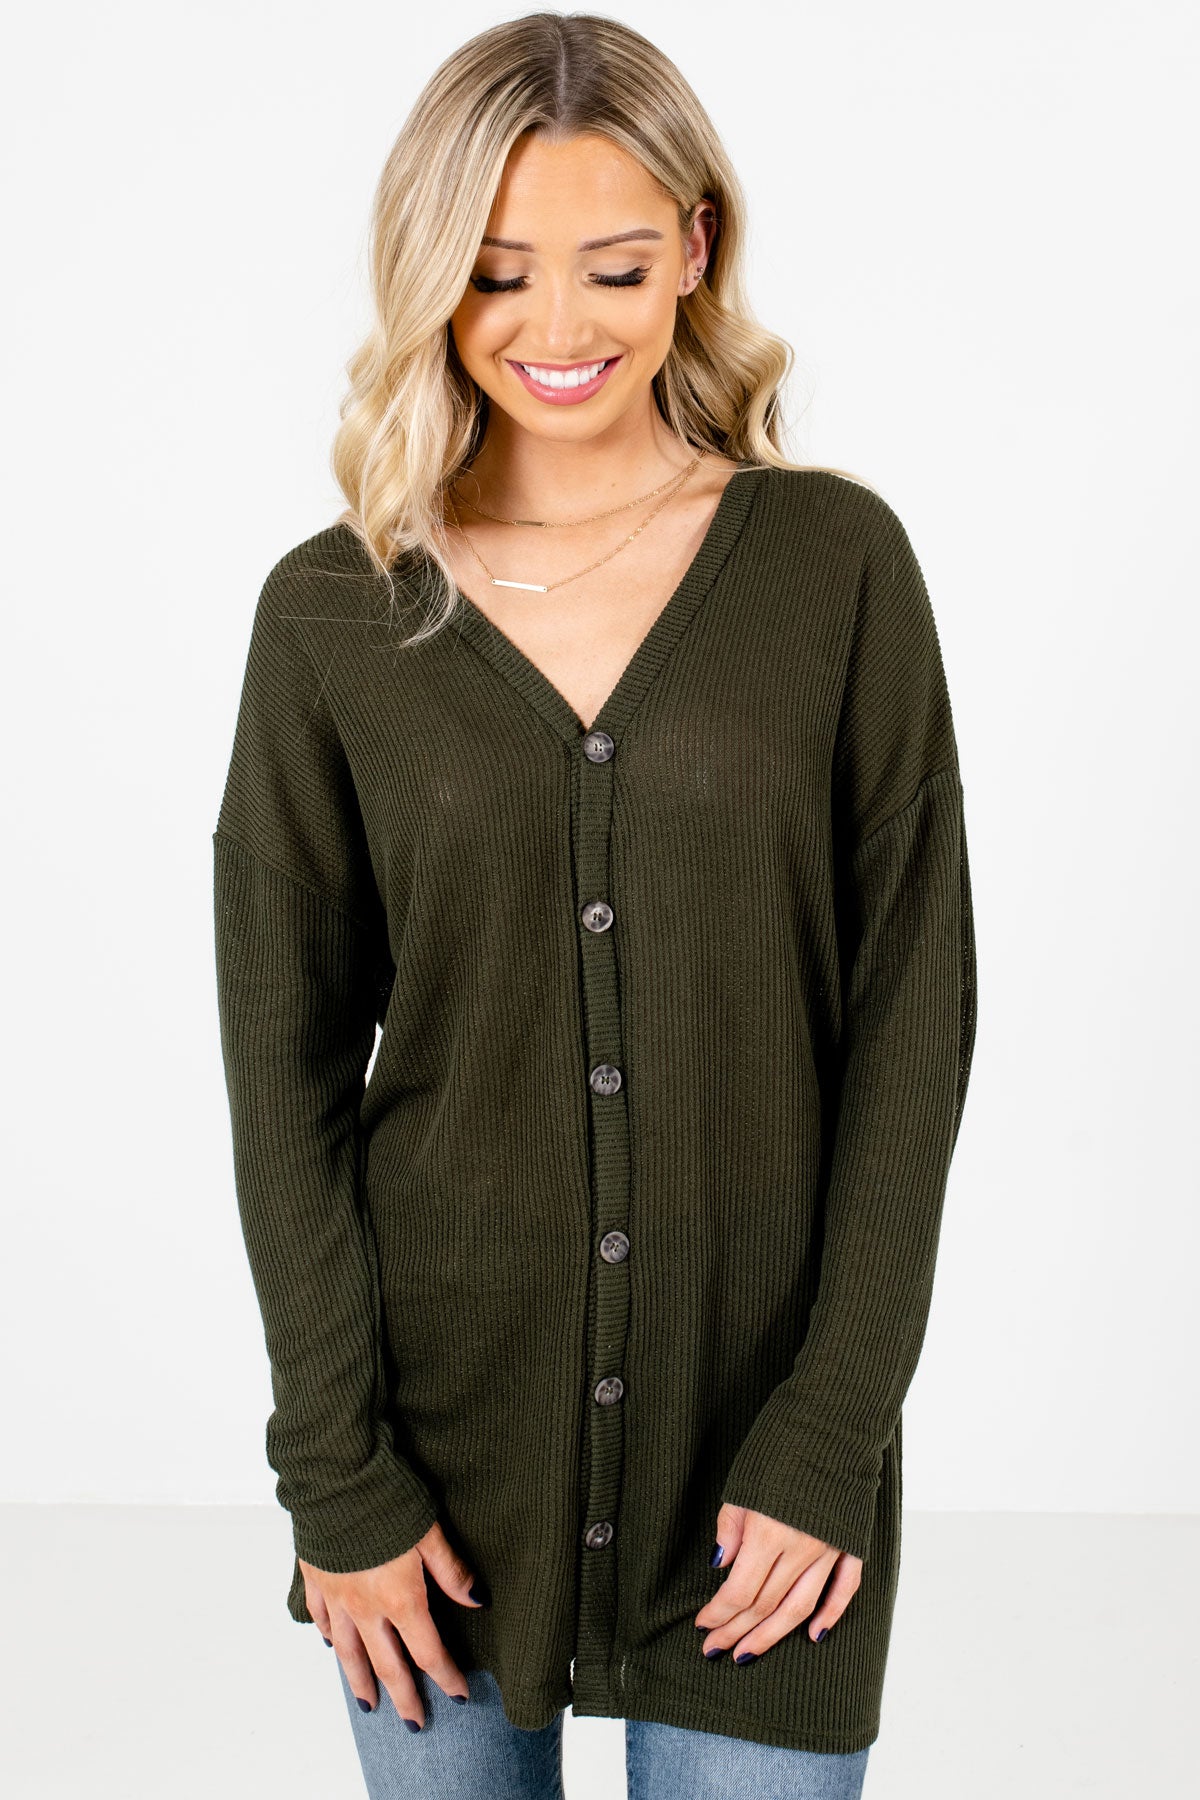 Olive Green Button-Up Front Boutique Tops for Women